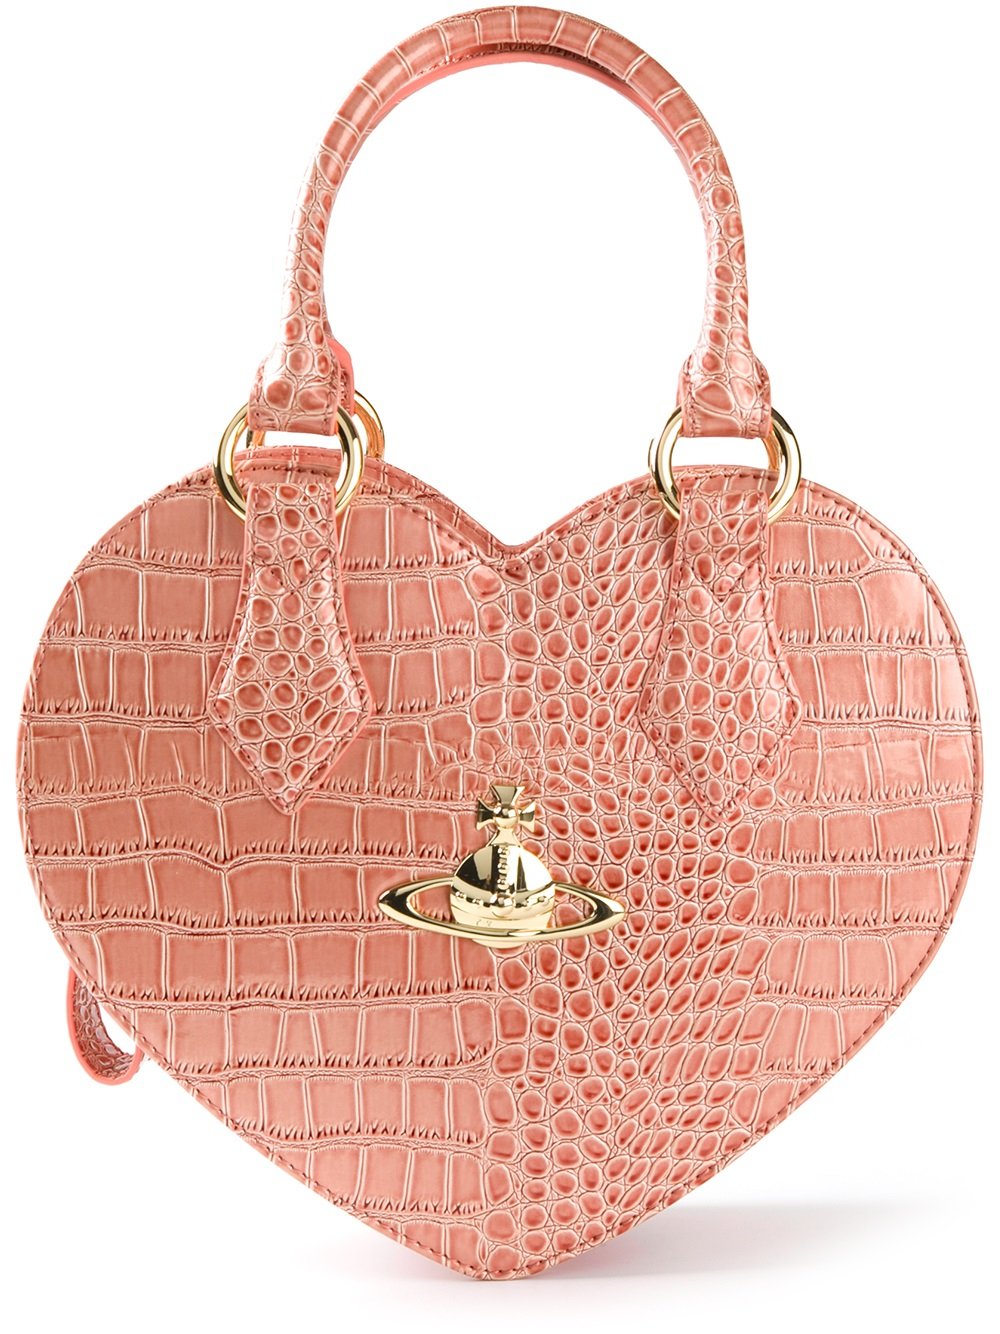 Vivienne Westwood New Chancery Heart Bag in Pink & Purple (Pink) - Lyst